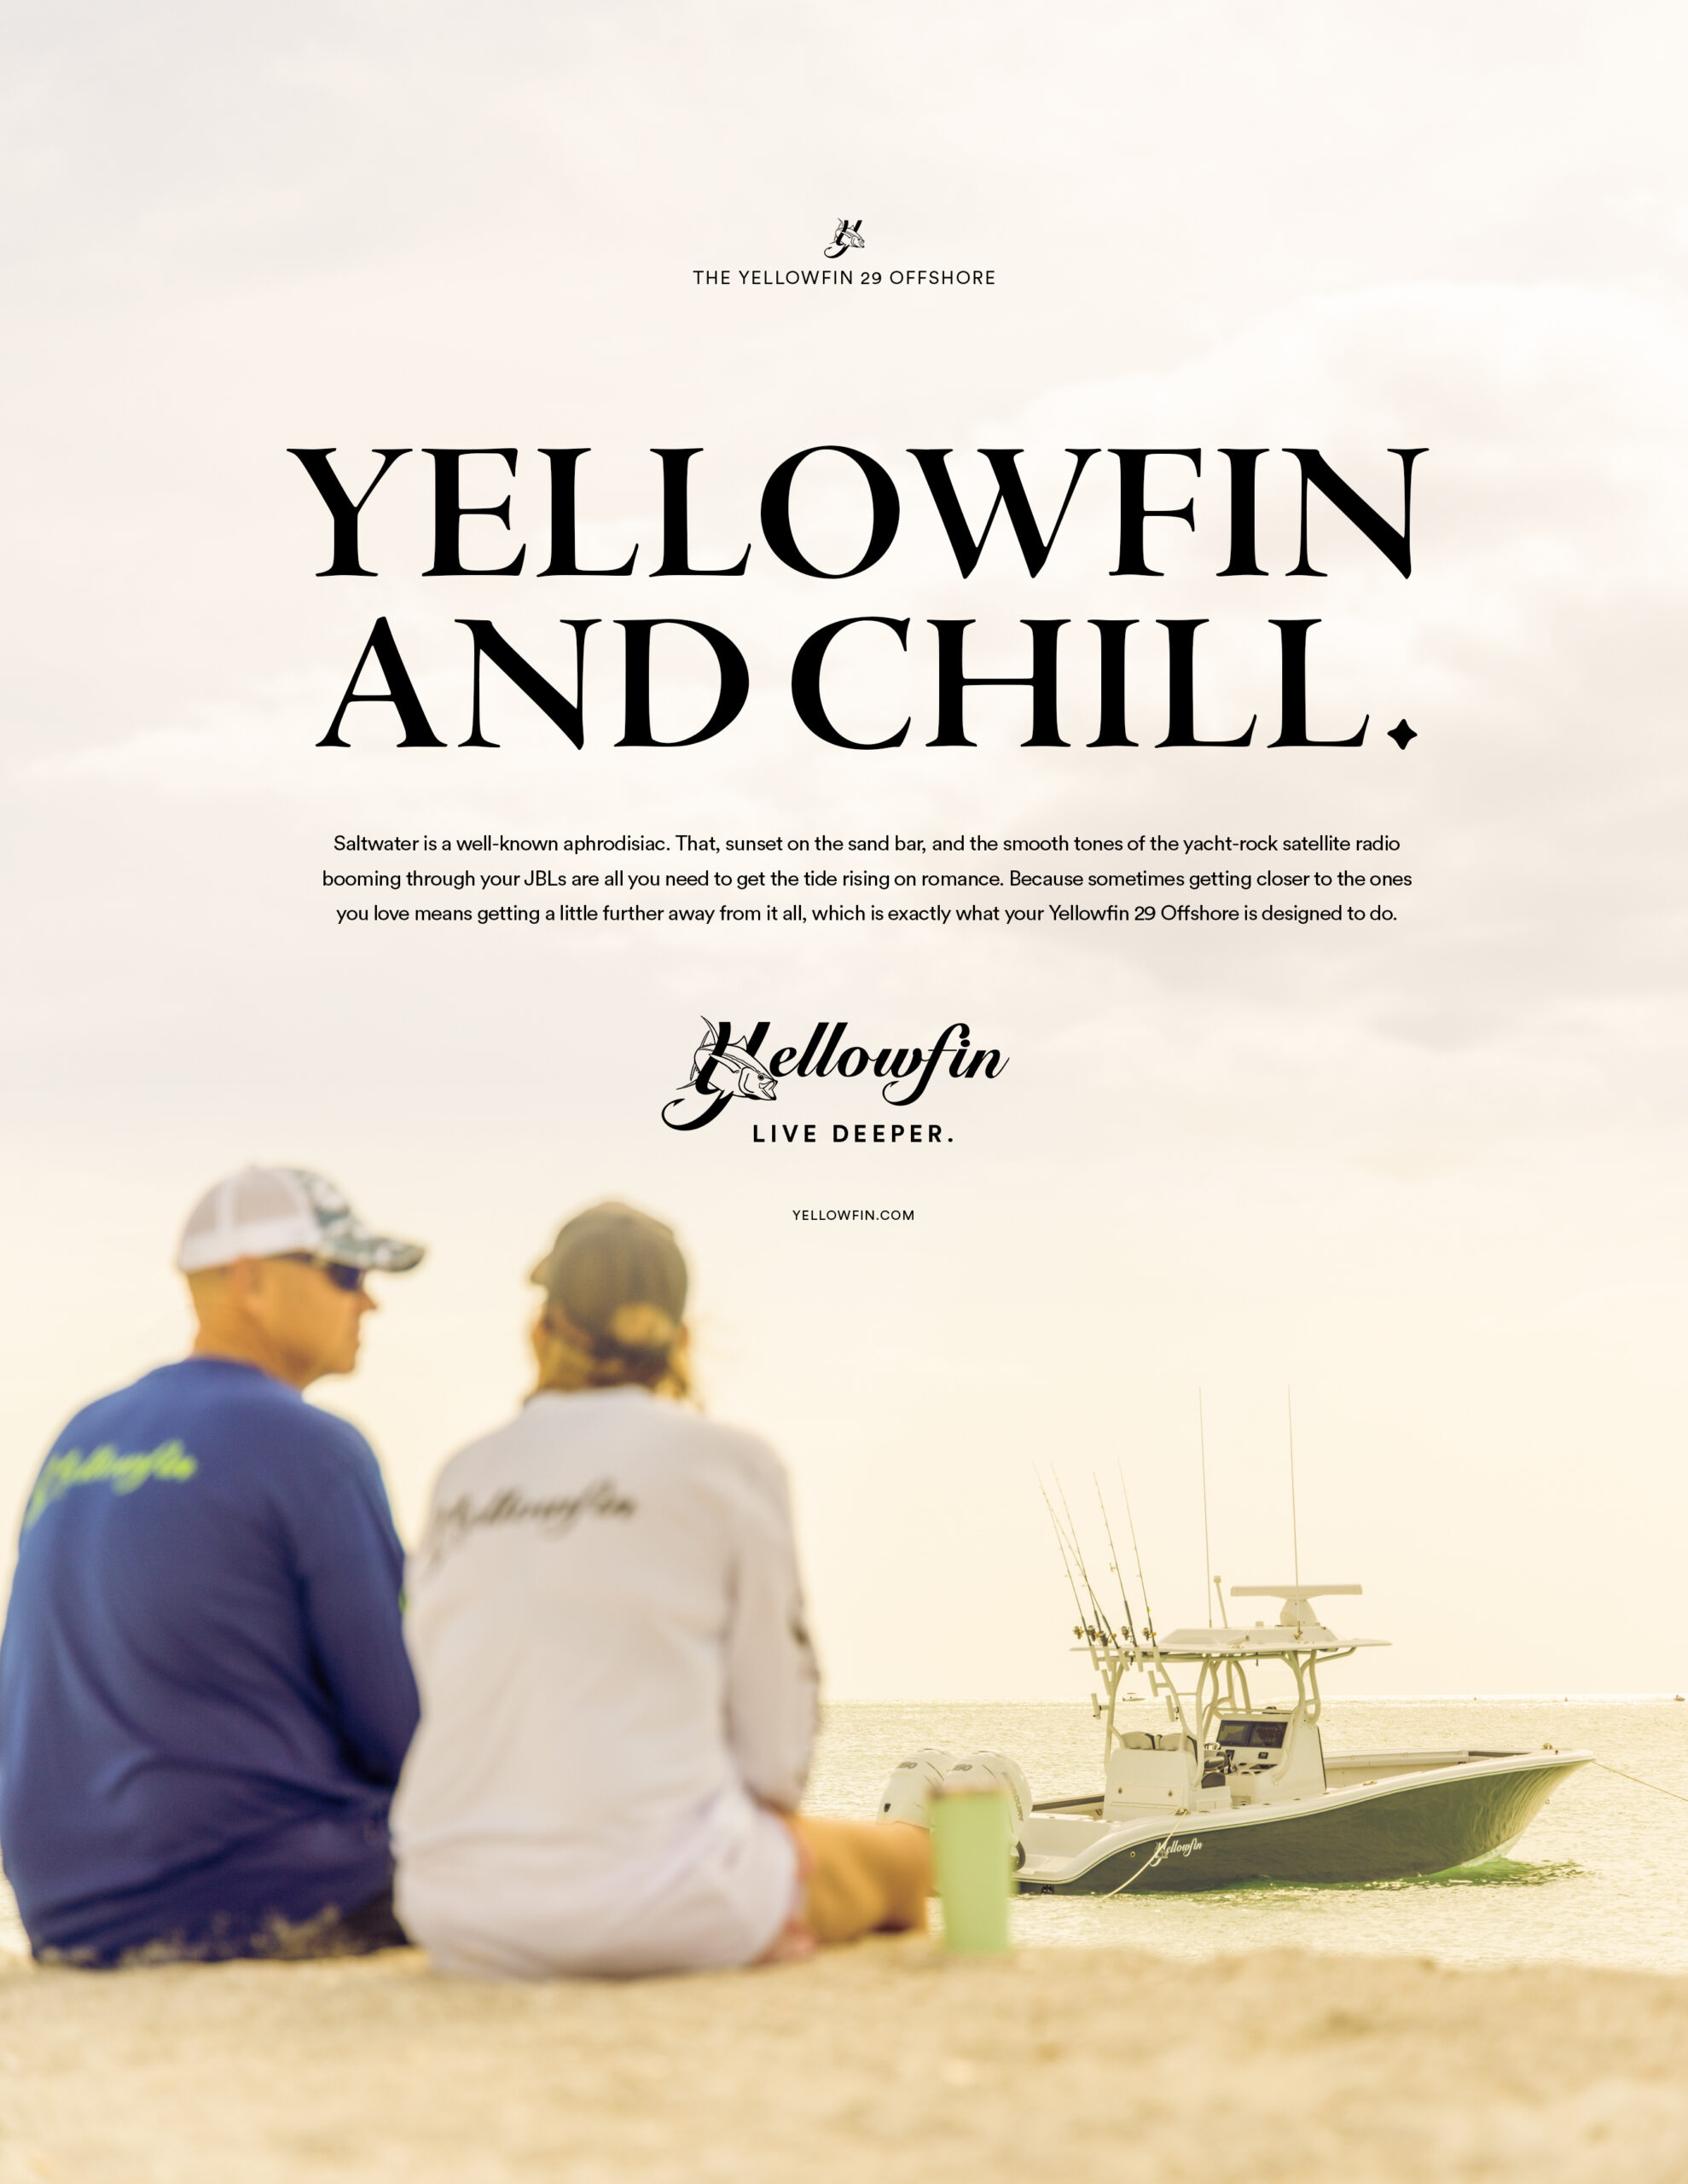 Yellowfin Print Advertising campaign